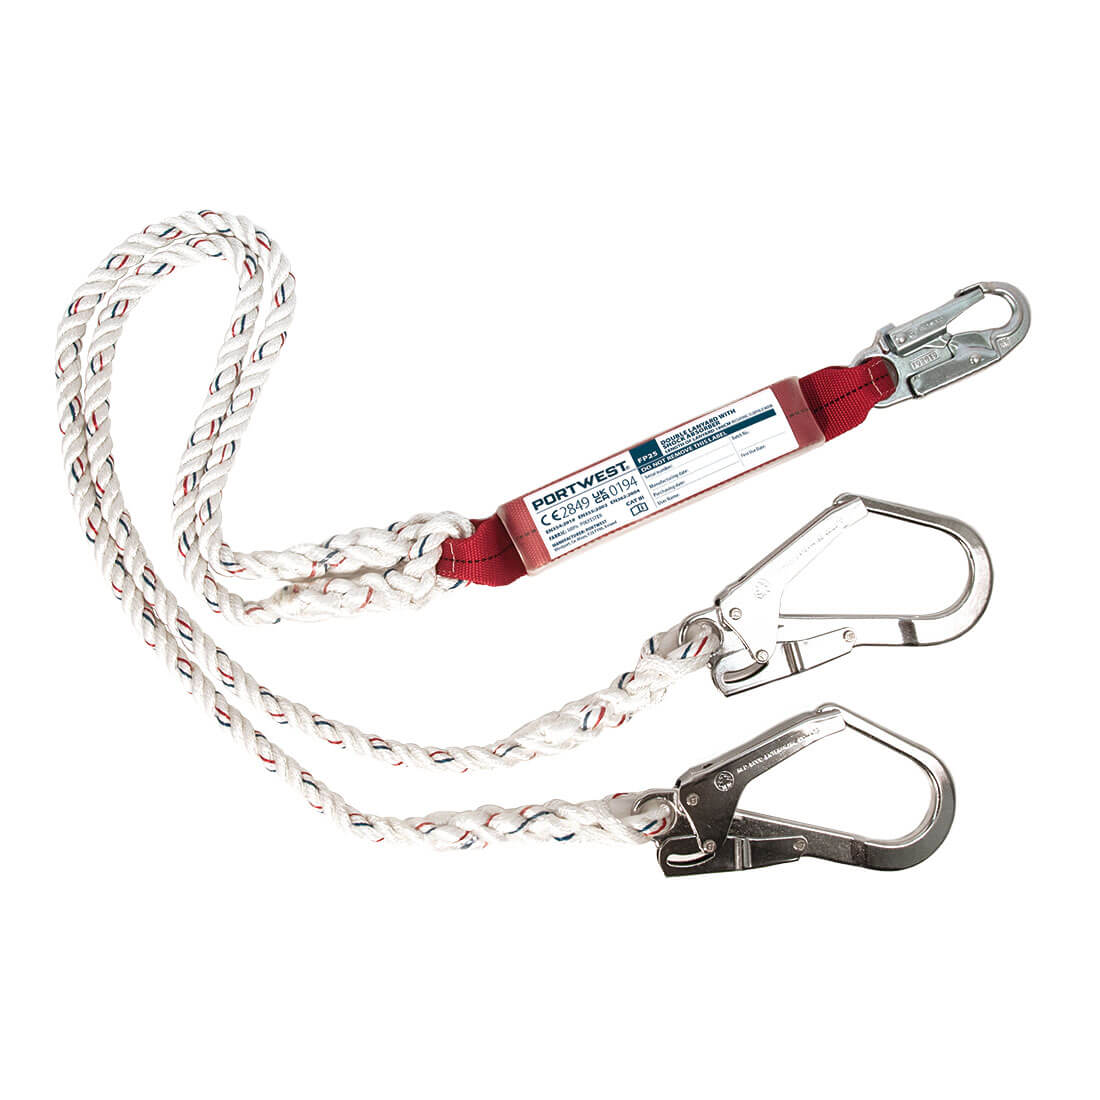 Portwest Double 1.8m Lanyard With Shock Absorber